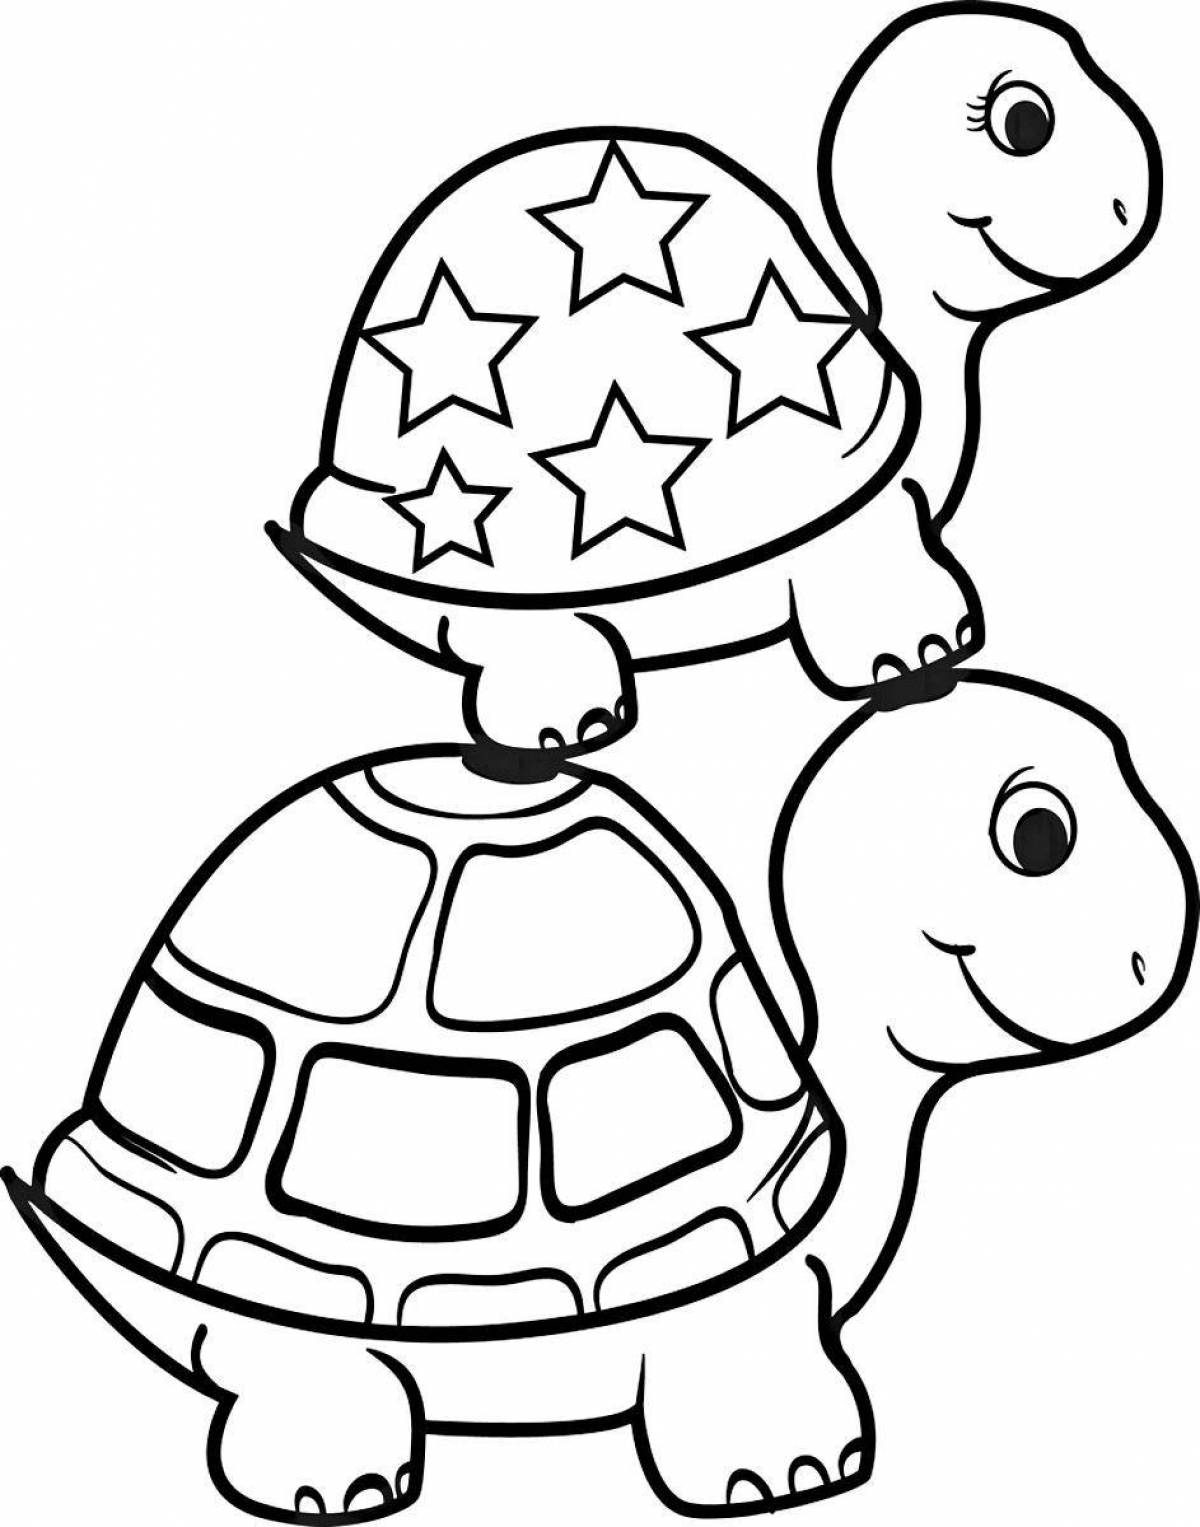 Shiny turtle coloring book